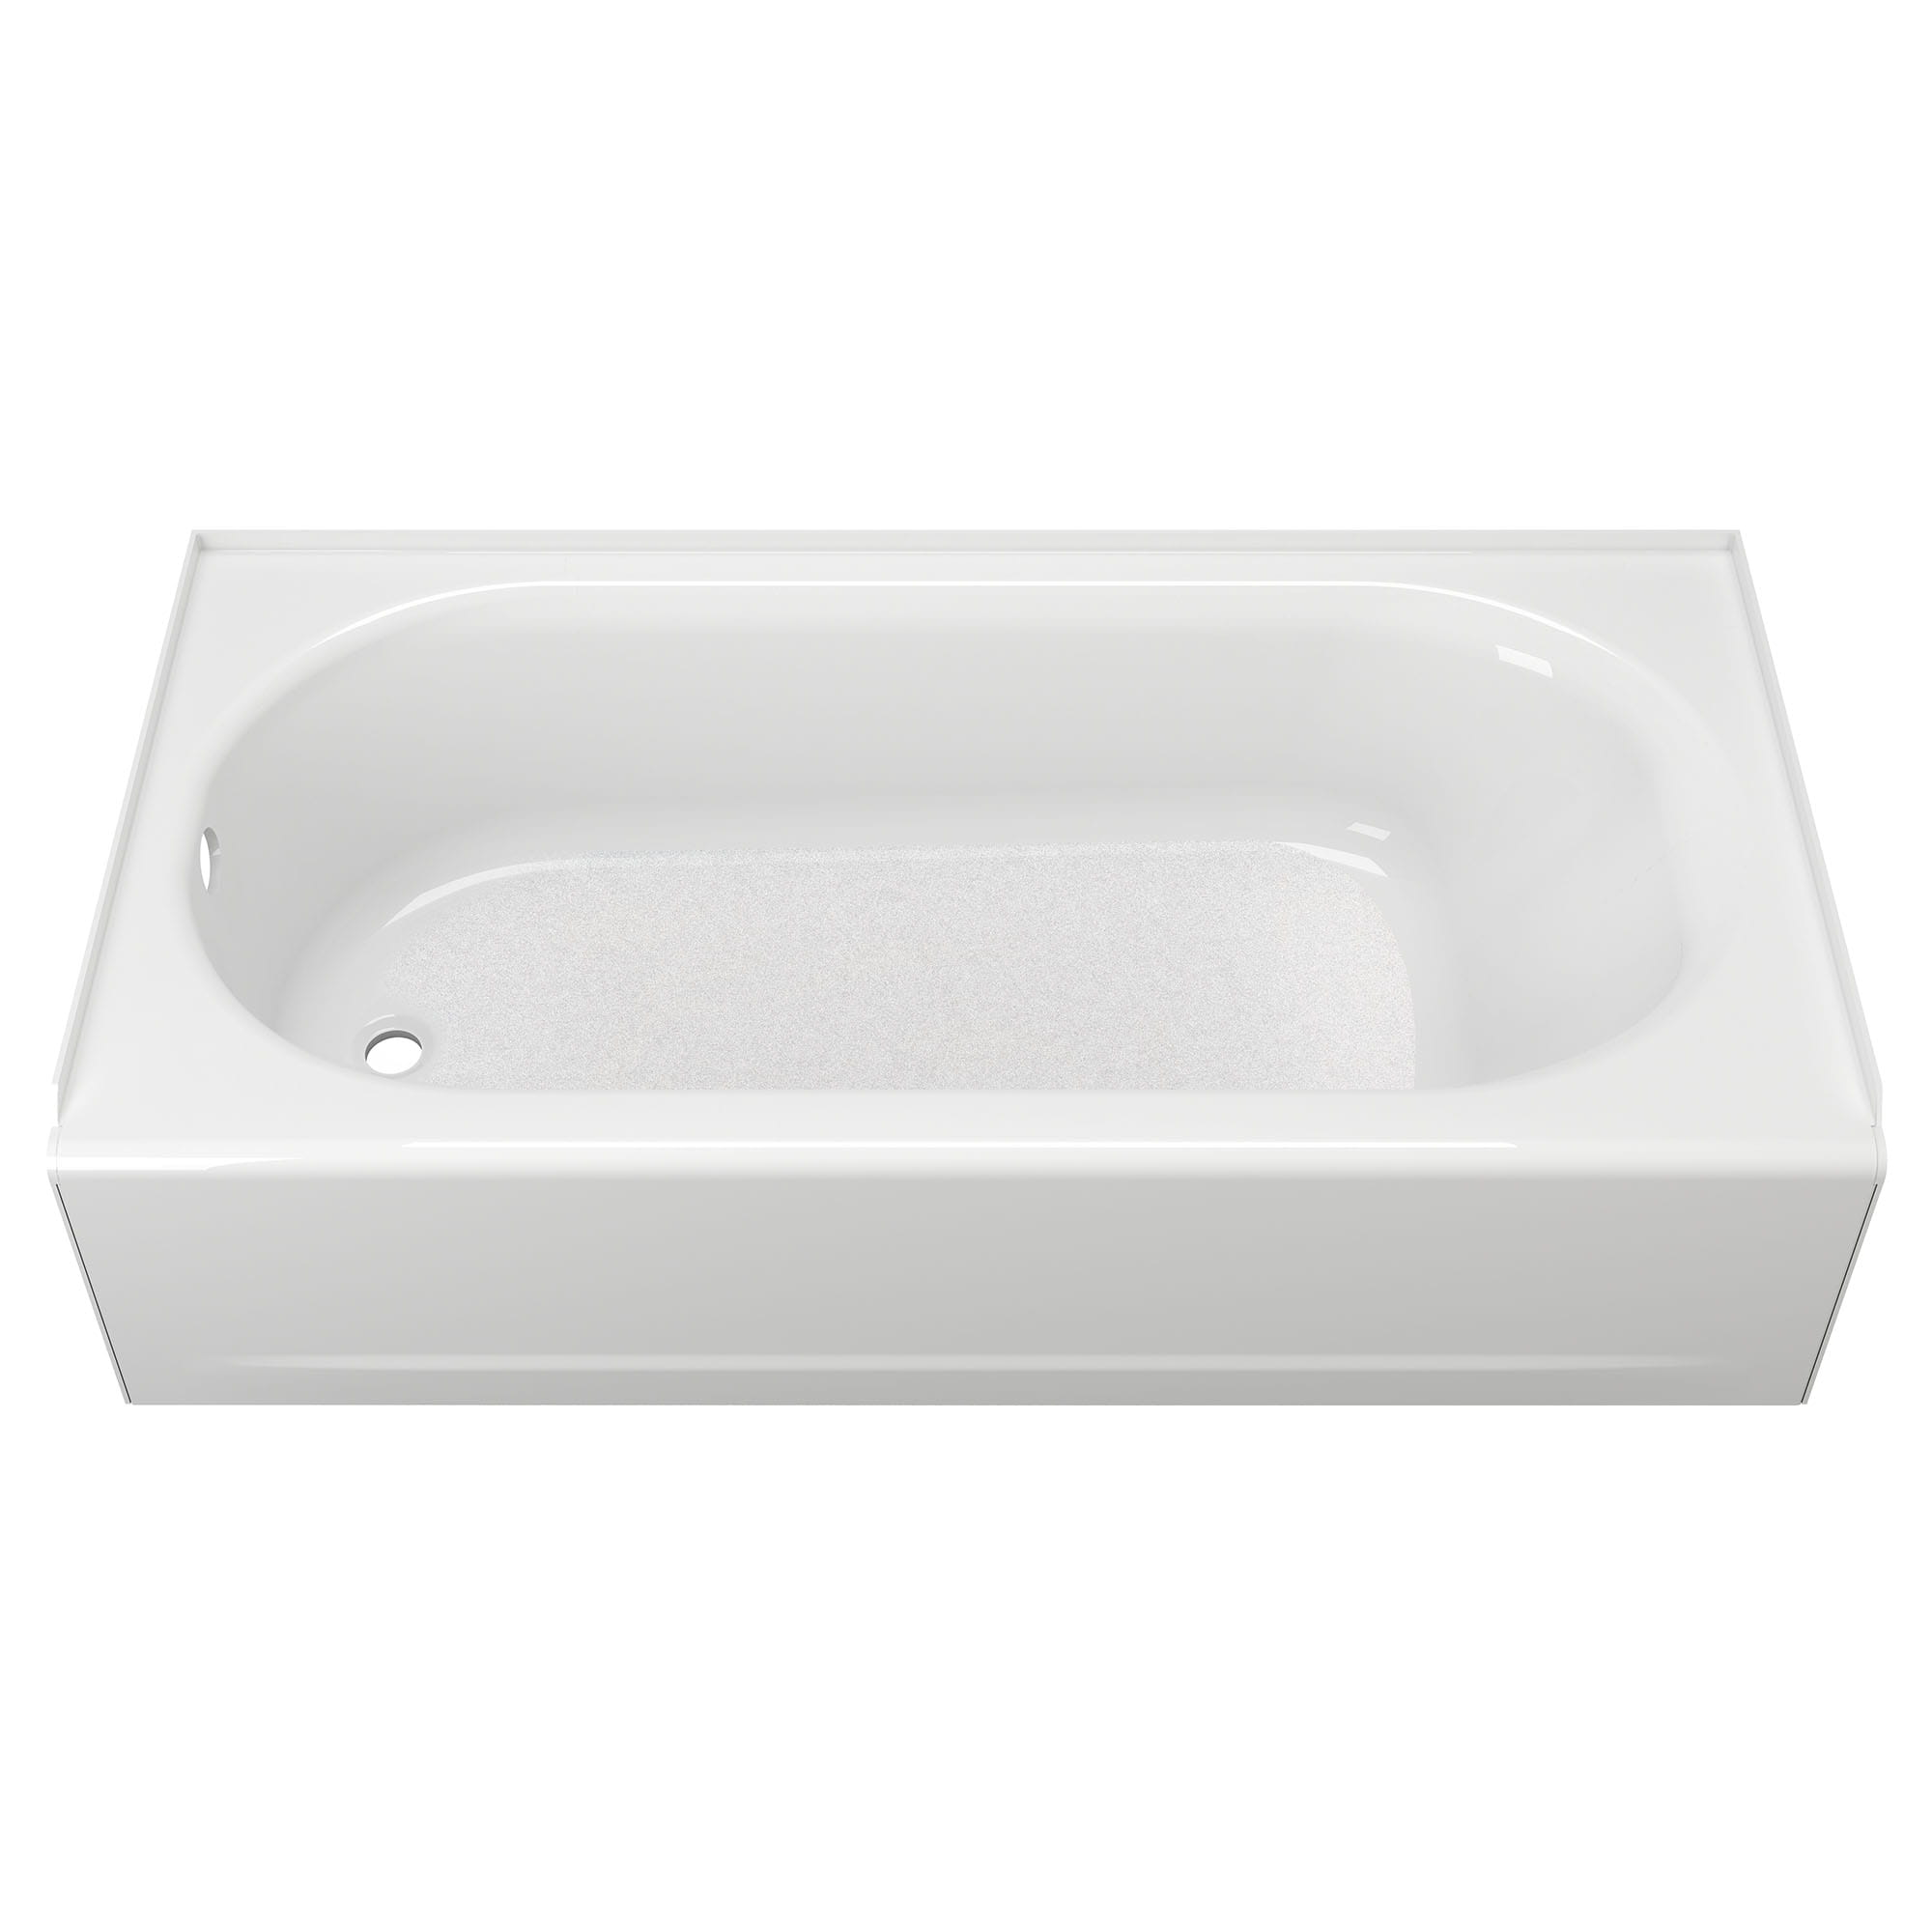 Princeton Americast 60 x 30 Inch Integral Apron Bathtub With Left Hand Outlet WHITE